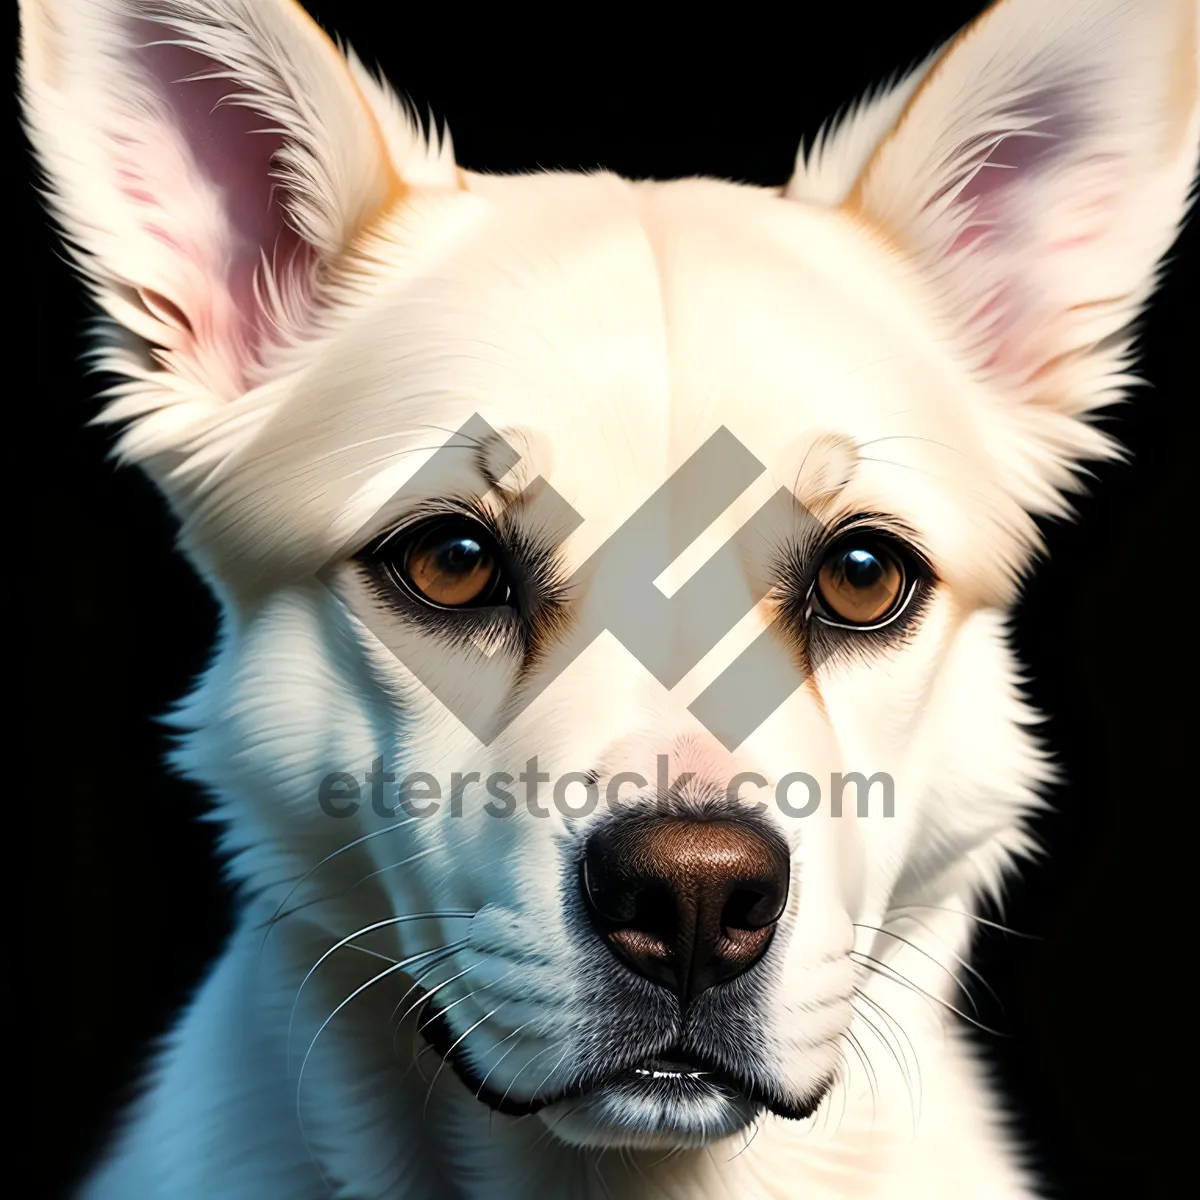 Picture of Adorable White Canine Portrait - Purebred Puppy with Expressive Eyes